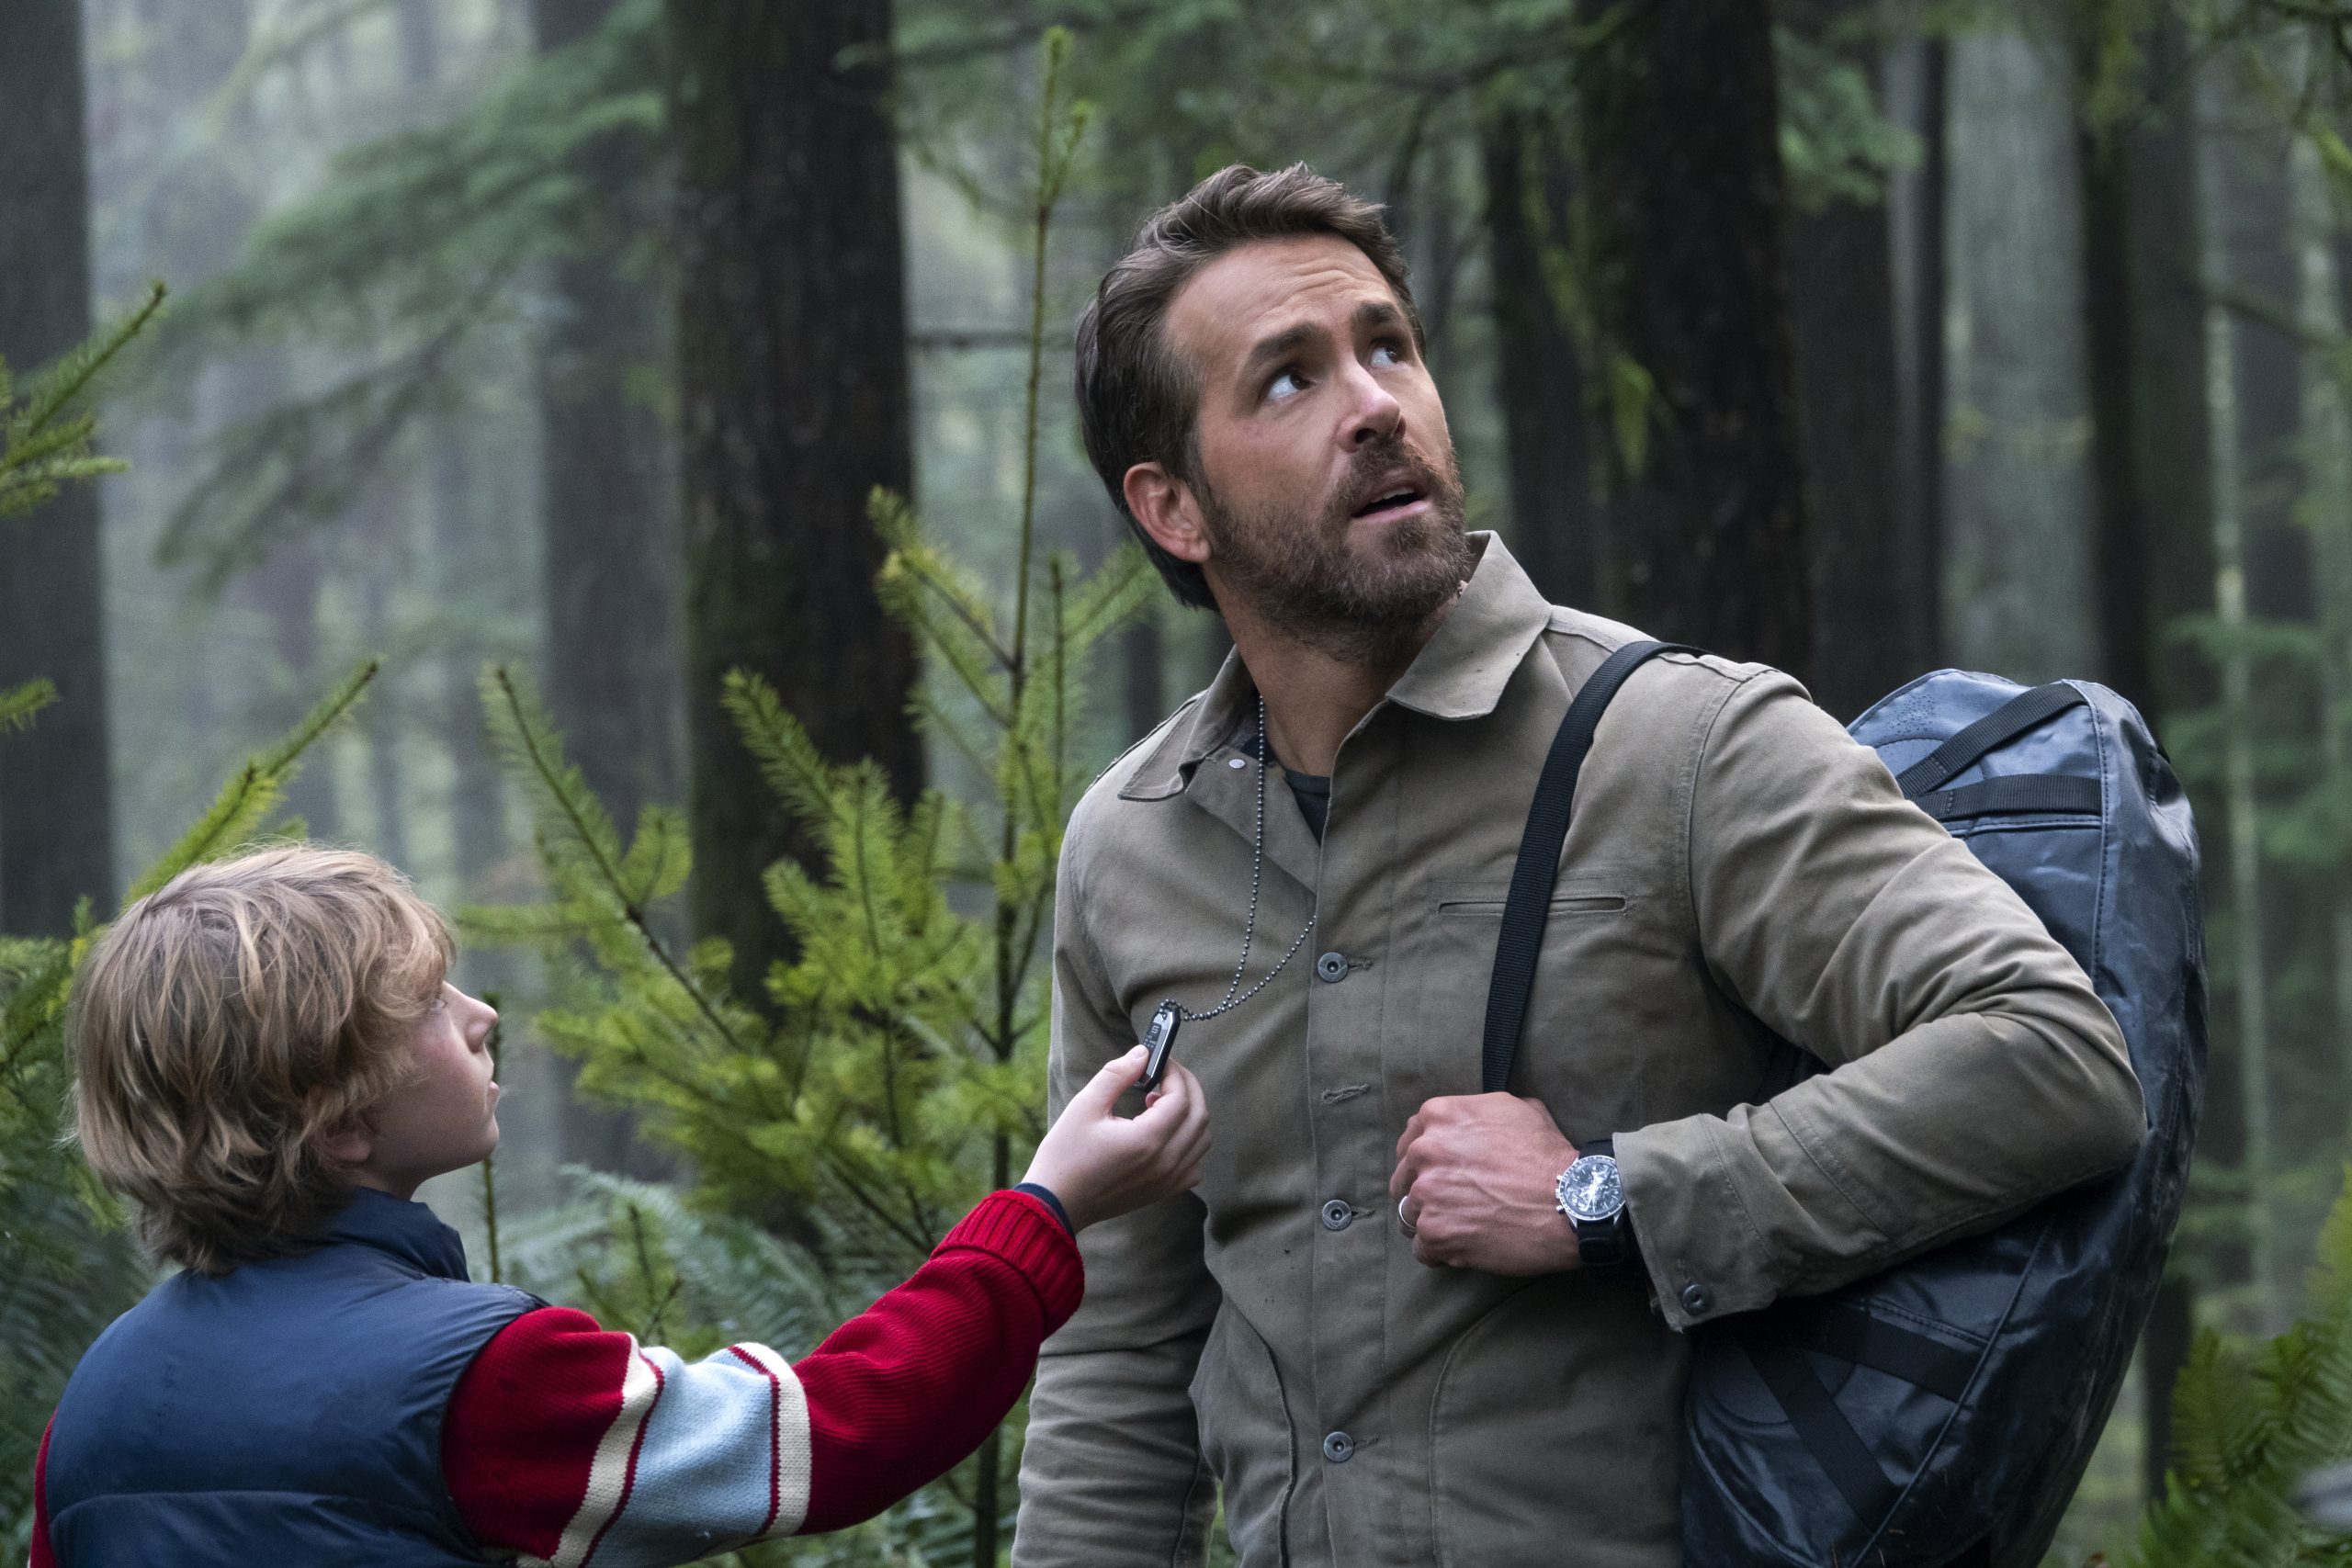 THE ADAM PROJECT - (L to R) Walker Scobell as Young Adam and Ryan Reynolds as Big Adam. Cr. Doane Gregory/Netflix © 2022